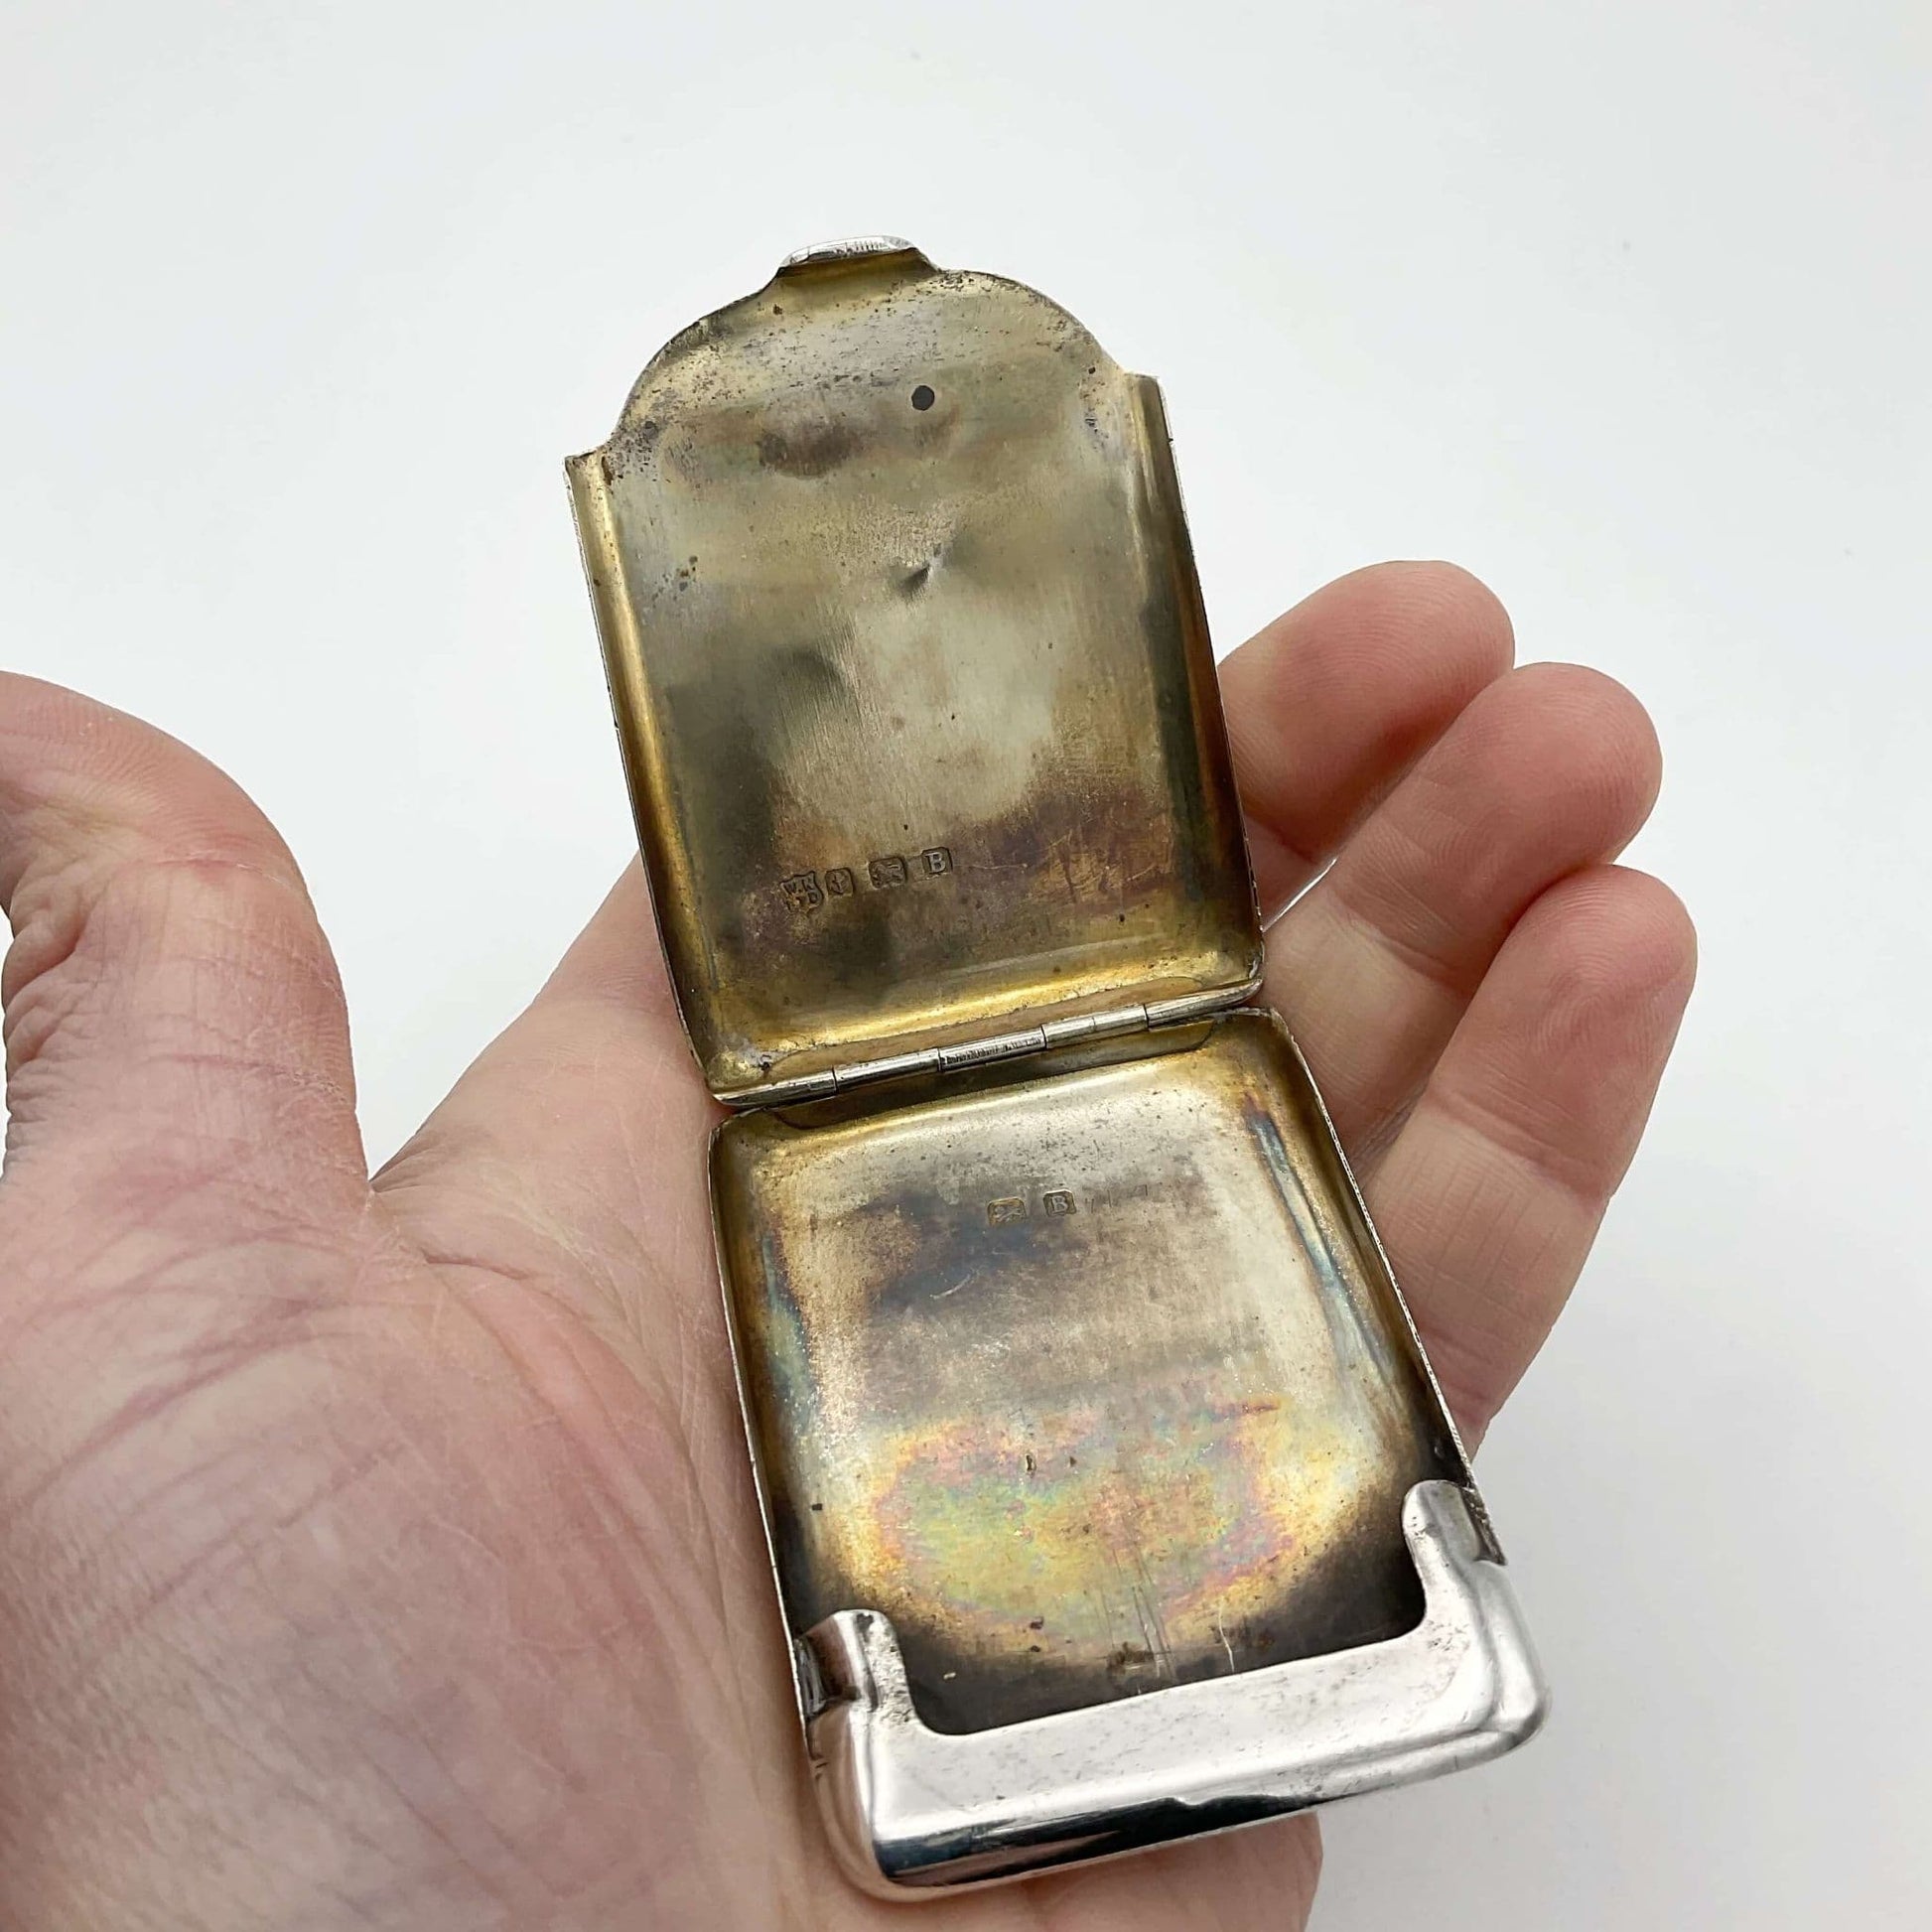 Silver matchbook case with the gilded interior showing held in a hand.